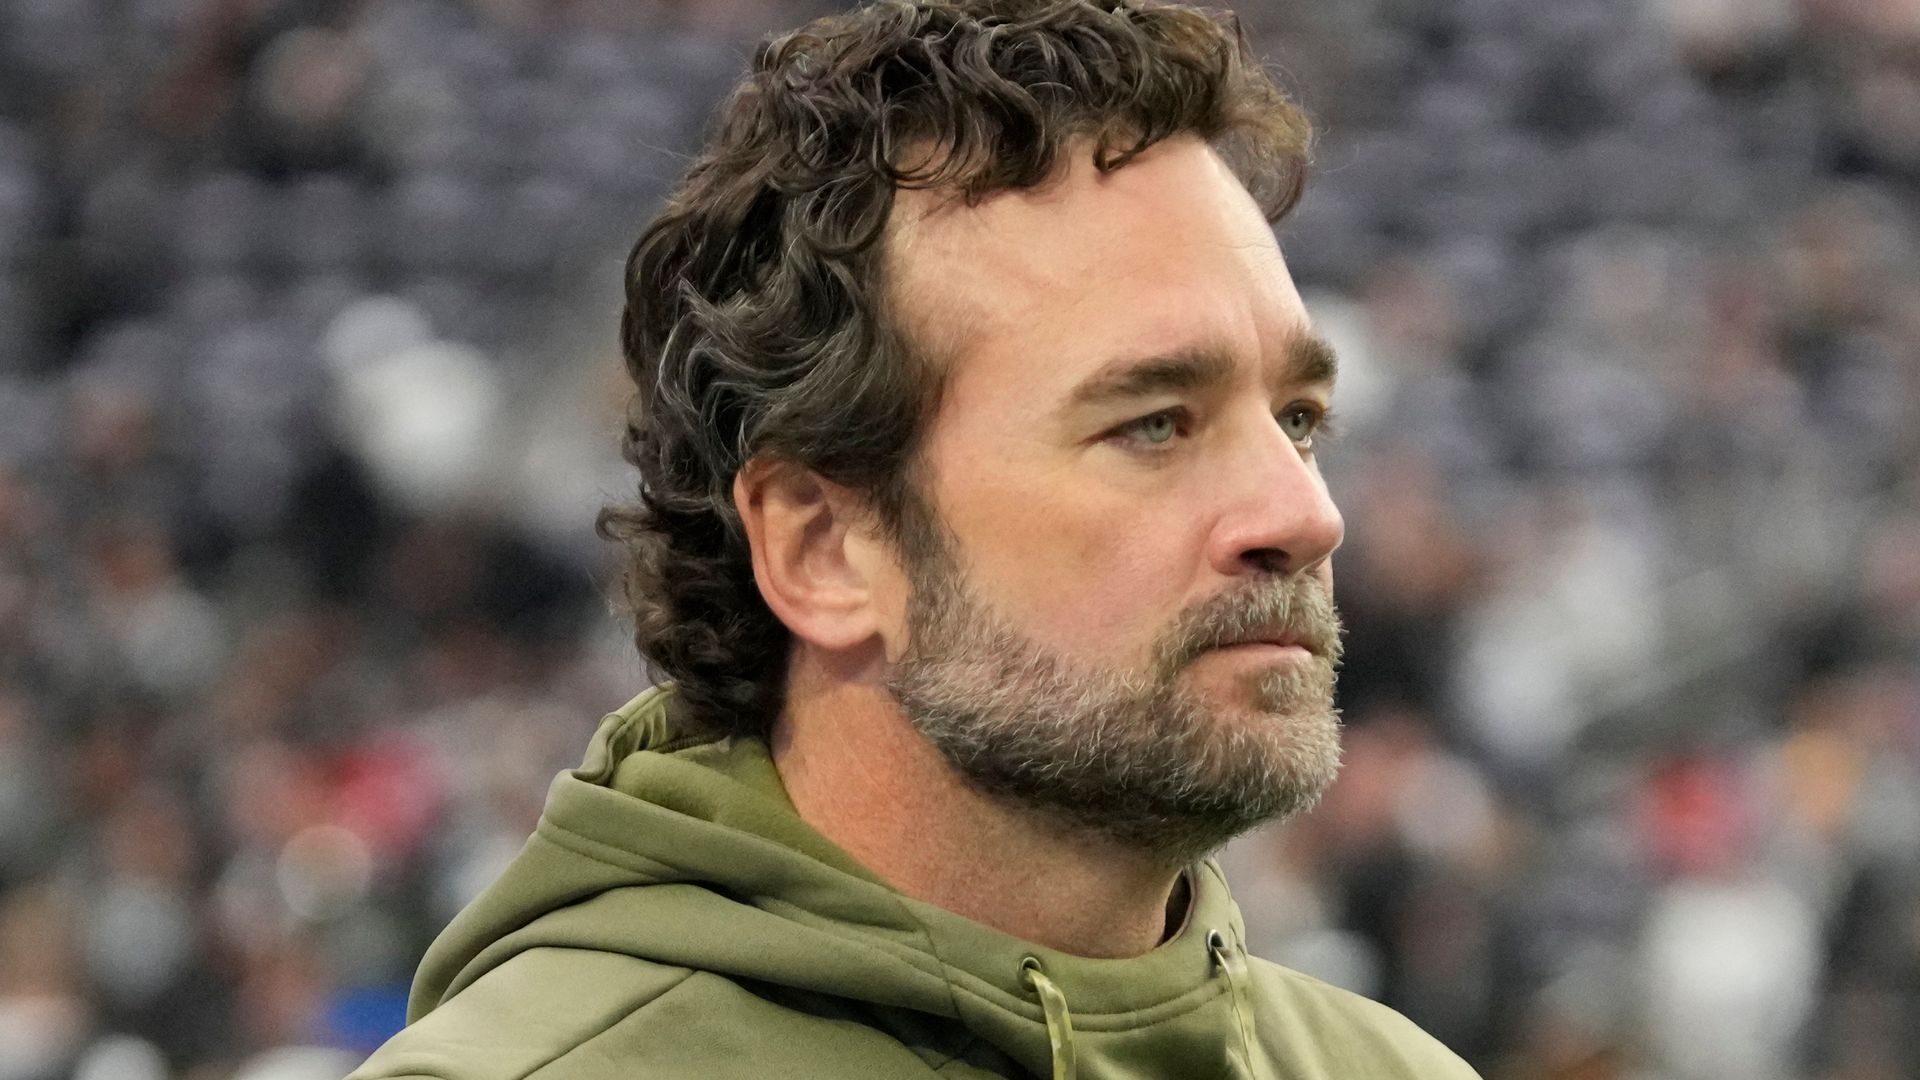 Can controversial Jeff Saturday hire keep the Colts winning?